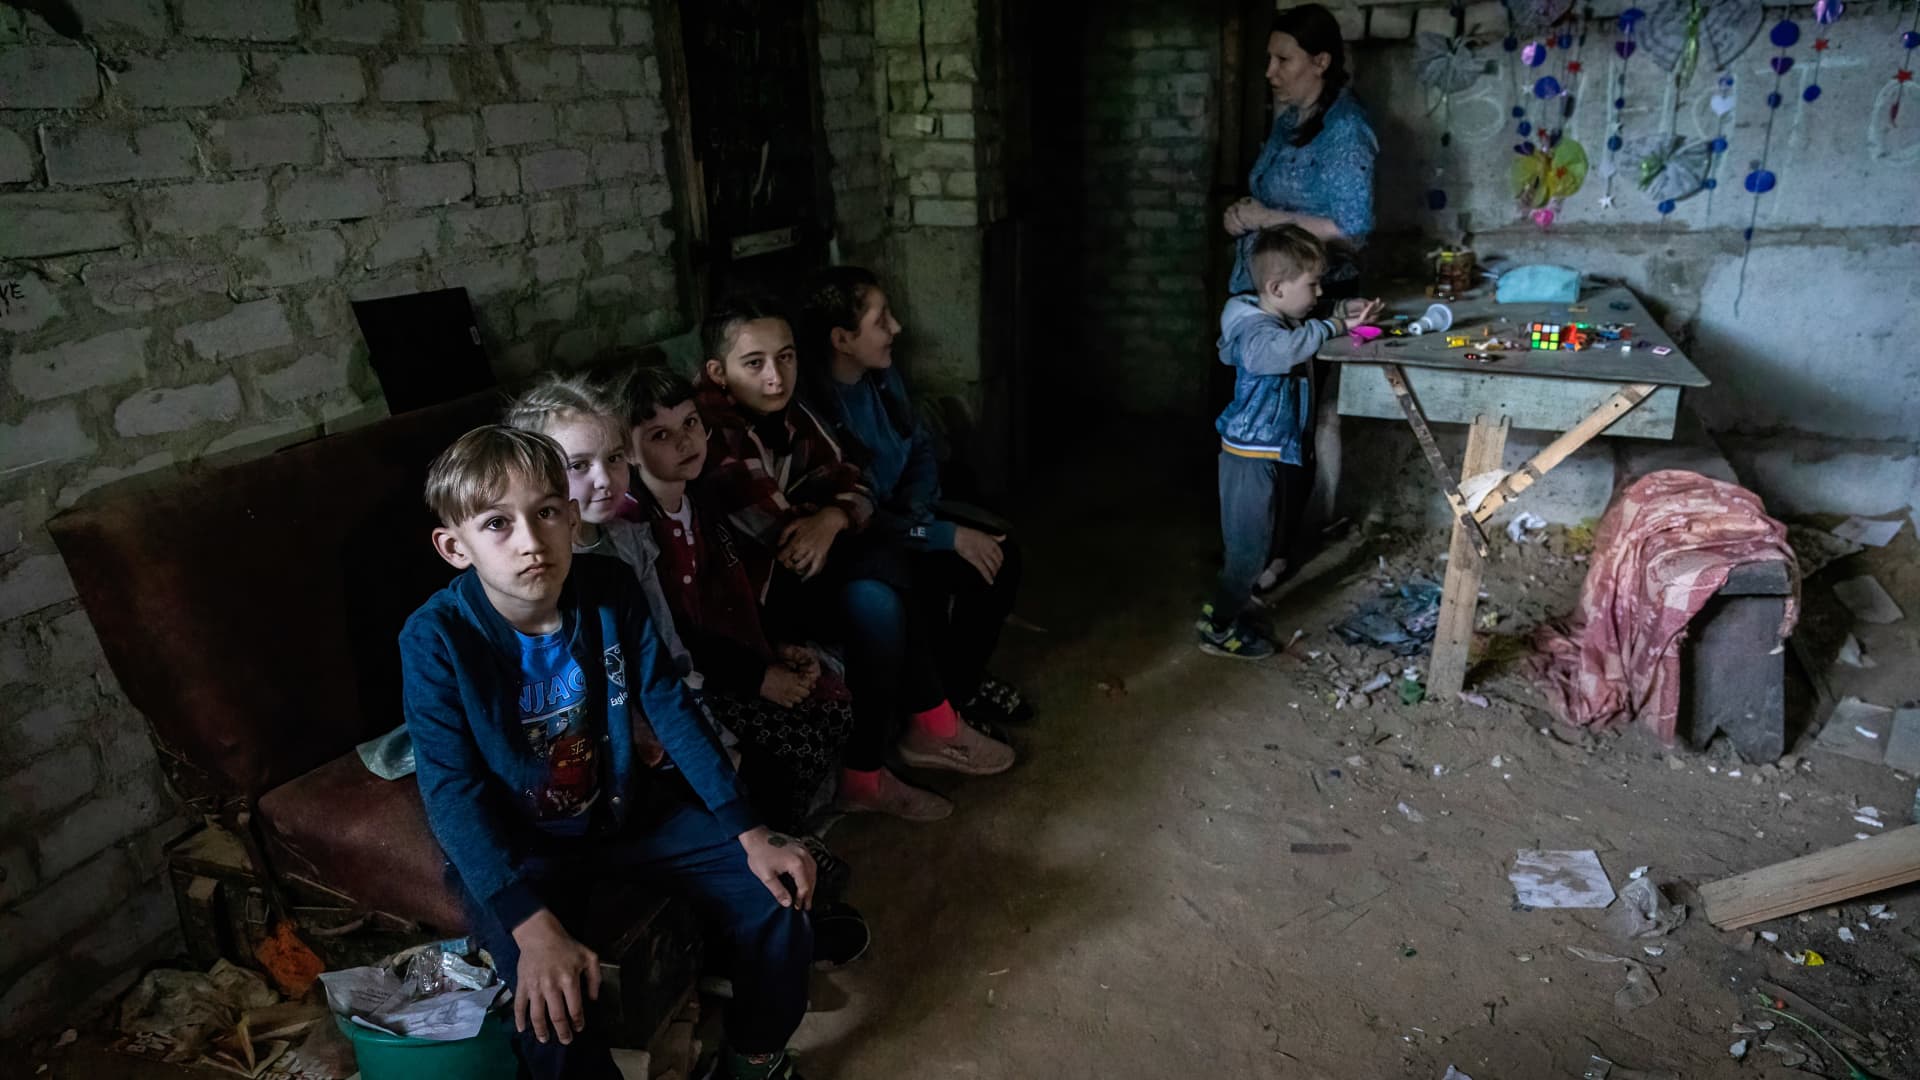 Children seen at an underground shelter. Nearly 100 days of war in Ukraine have rendered 3 million children inside Ukraine and over 2.2 million children in refugee-hosting countries in need of humanitarian aid, with nearly 2 out of every 3 children displaced by fighting.